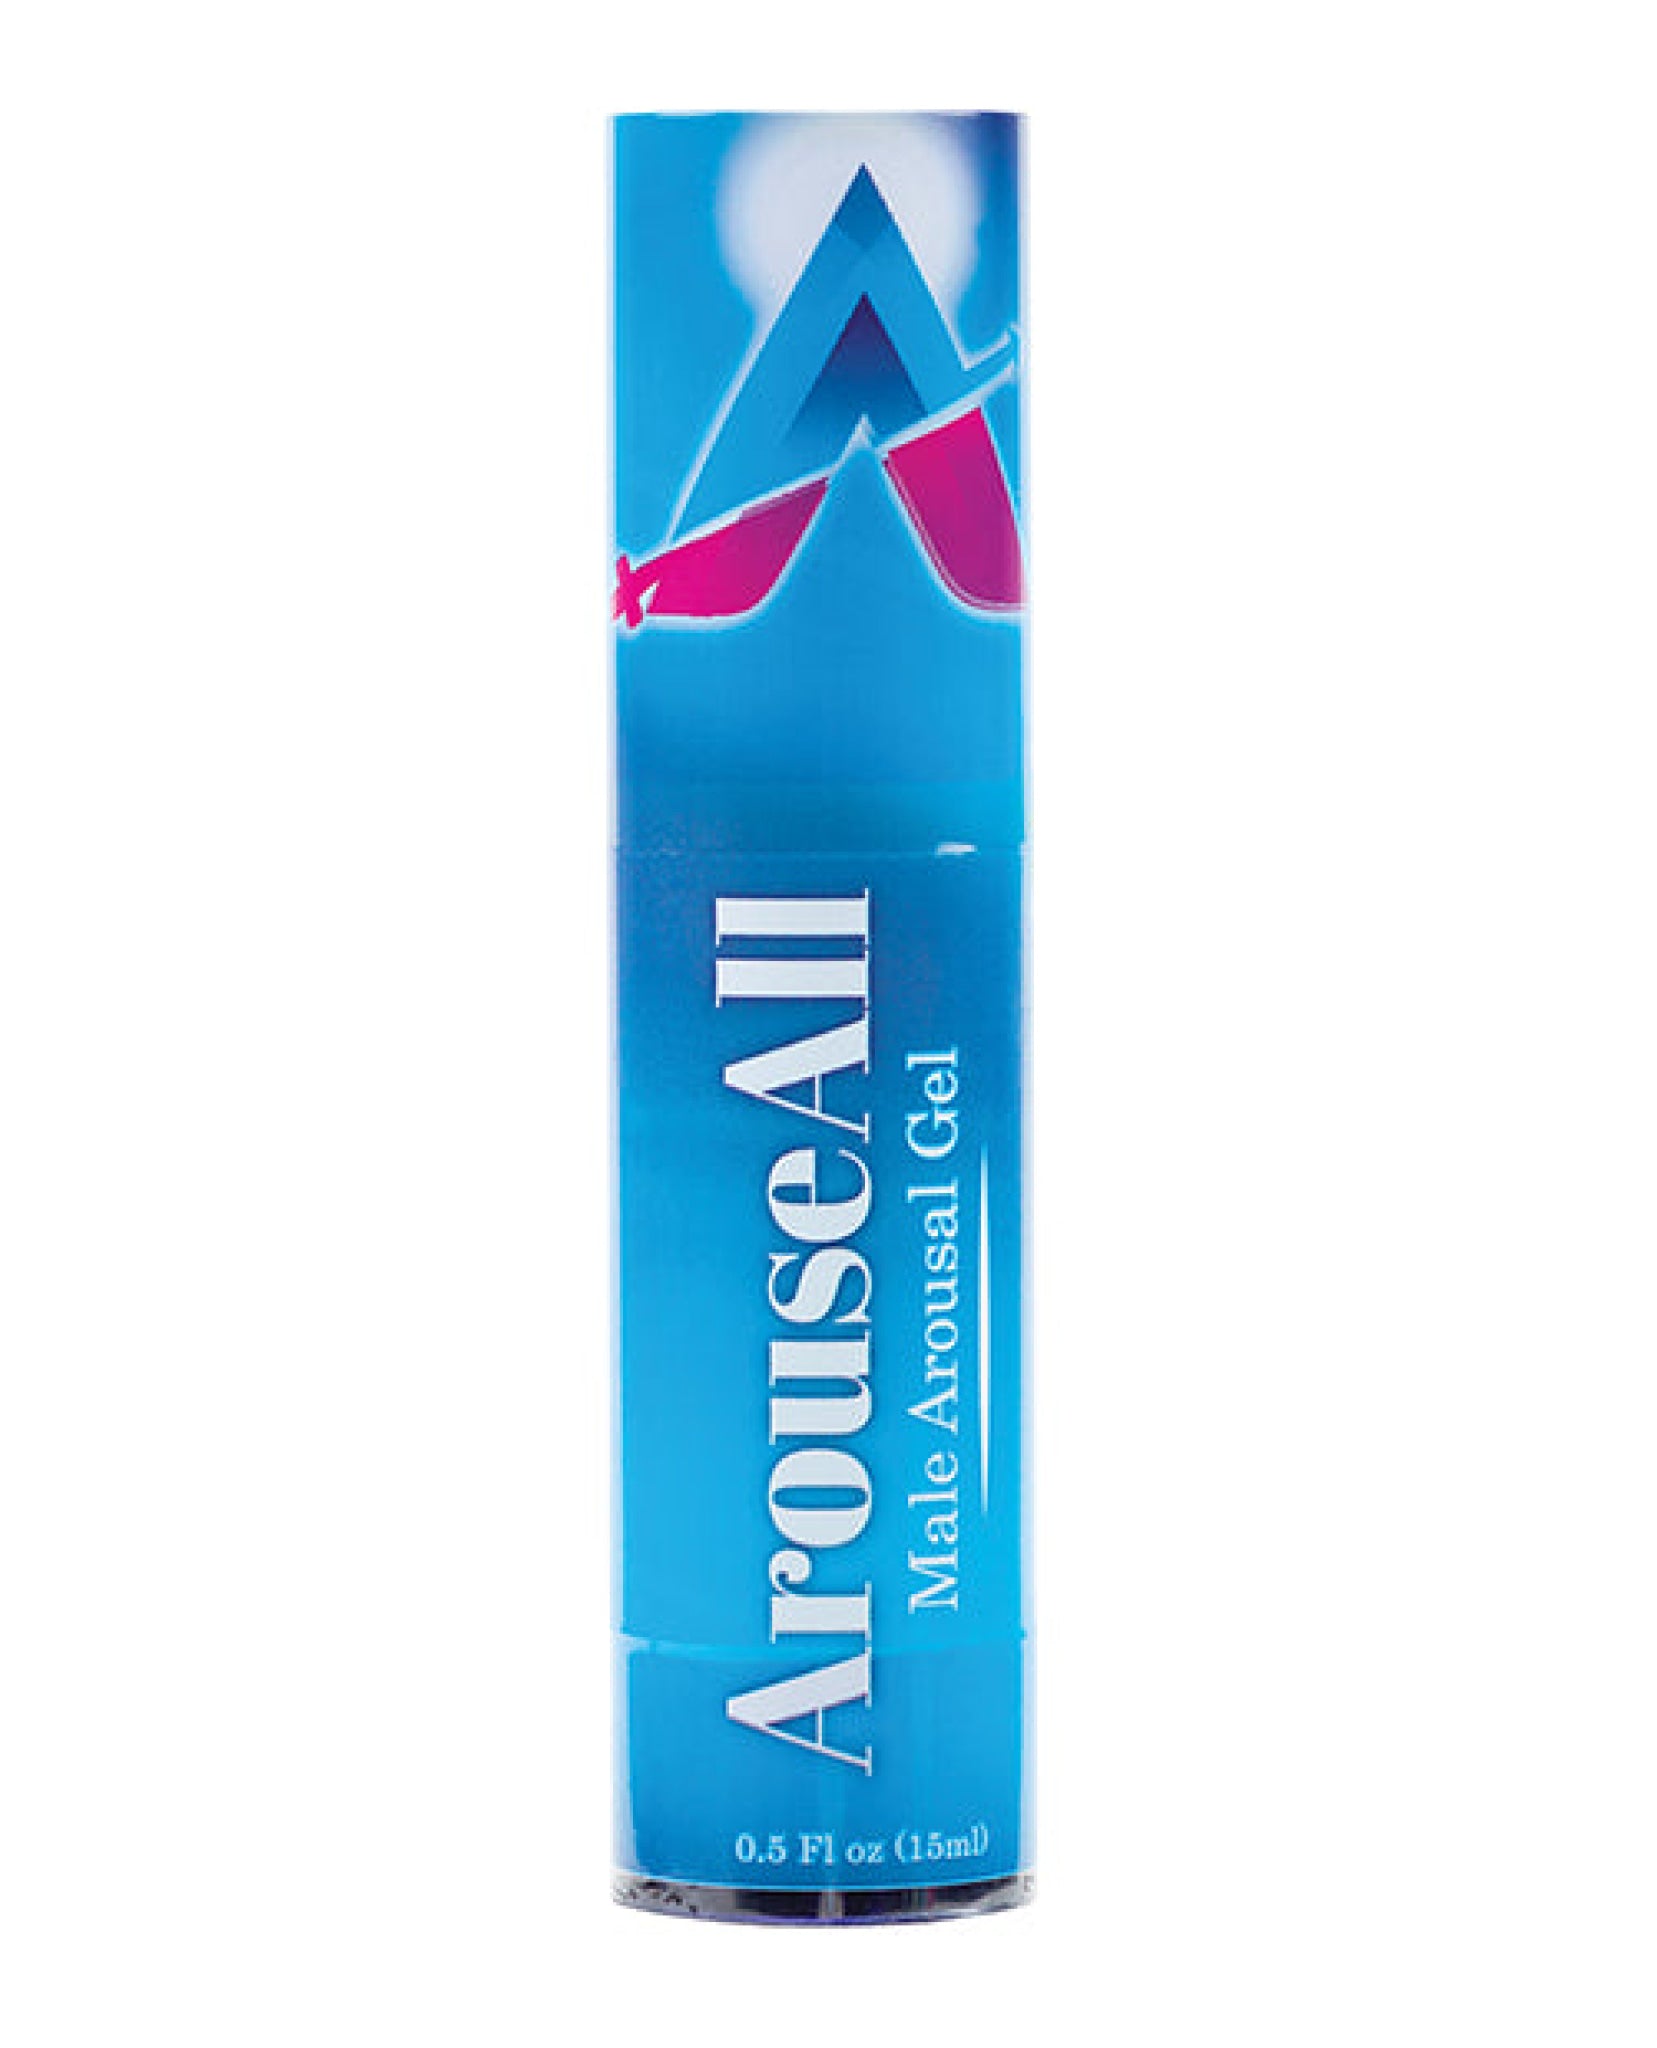 Arouseall Male Stimulating Gel - .5 Oz Bottle Body Action